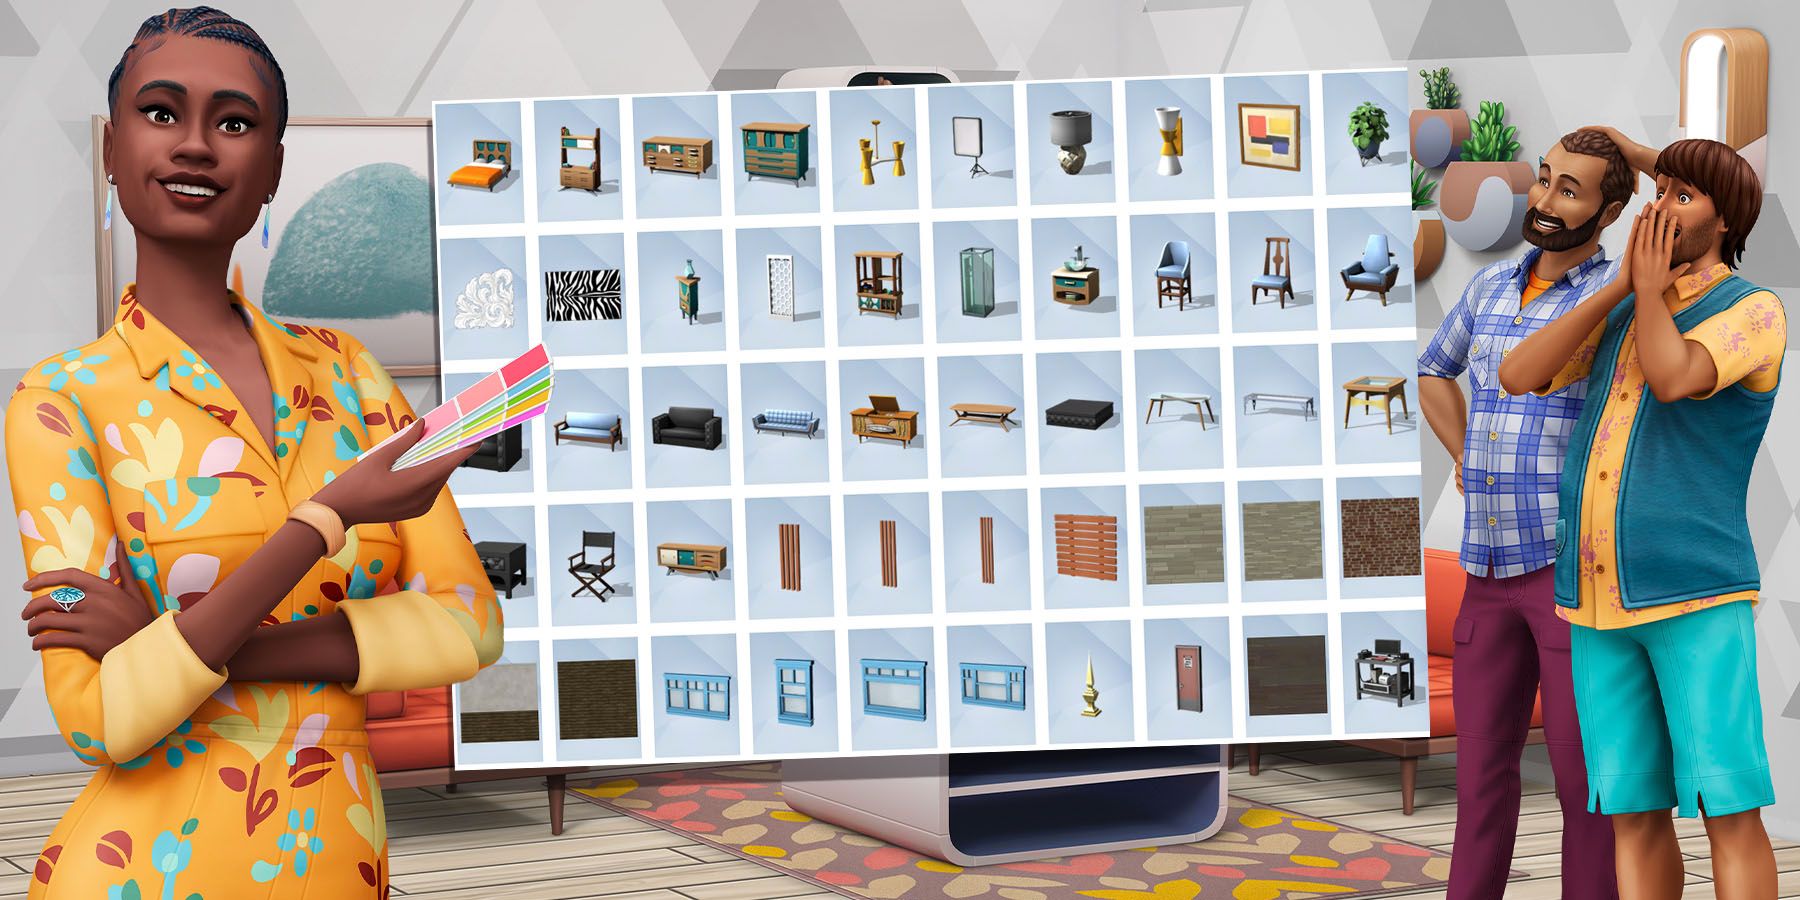 The Sims 4 How To Unlock All Objects